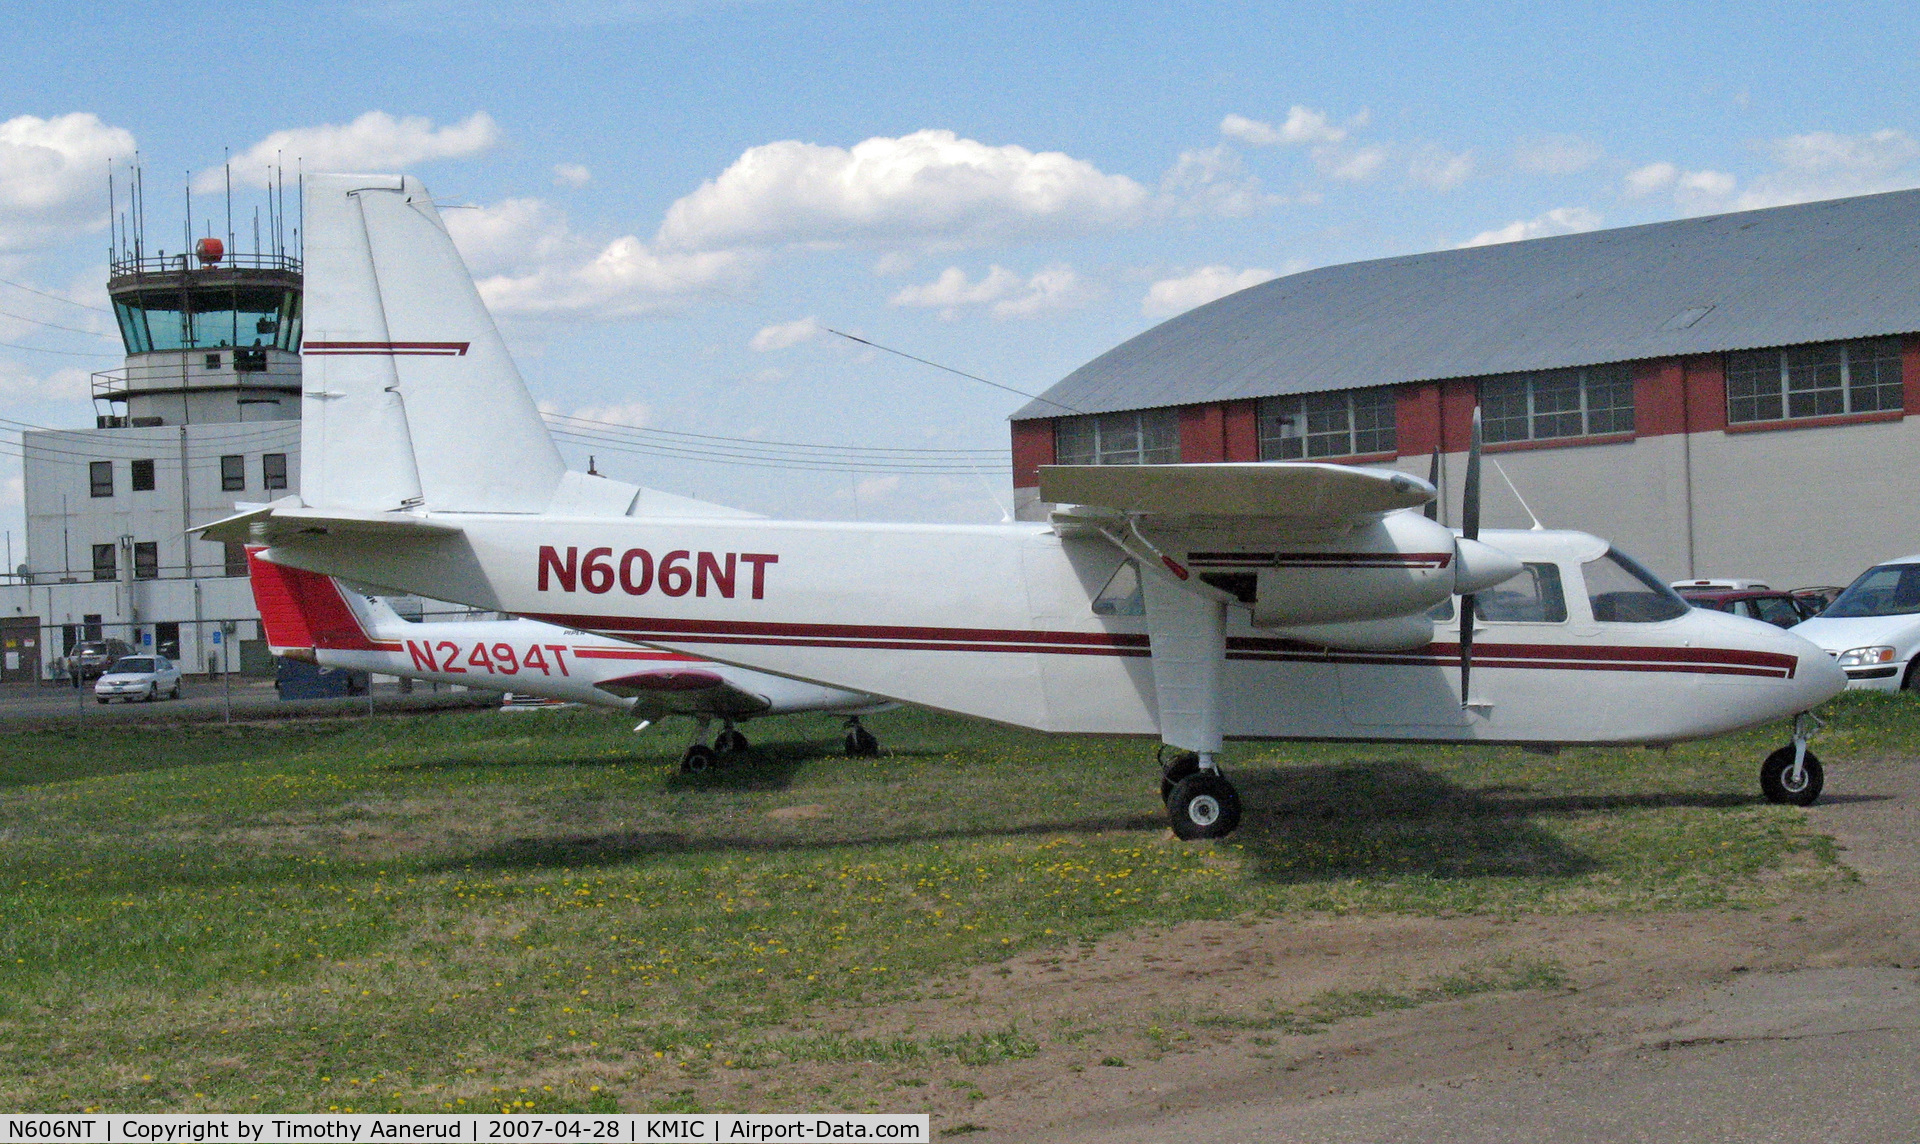 N606NT, 1972 Britten-Norman BN-2A-8 Islander C/N 653, Parked at North of 40 Aviation, near the control tower